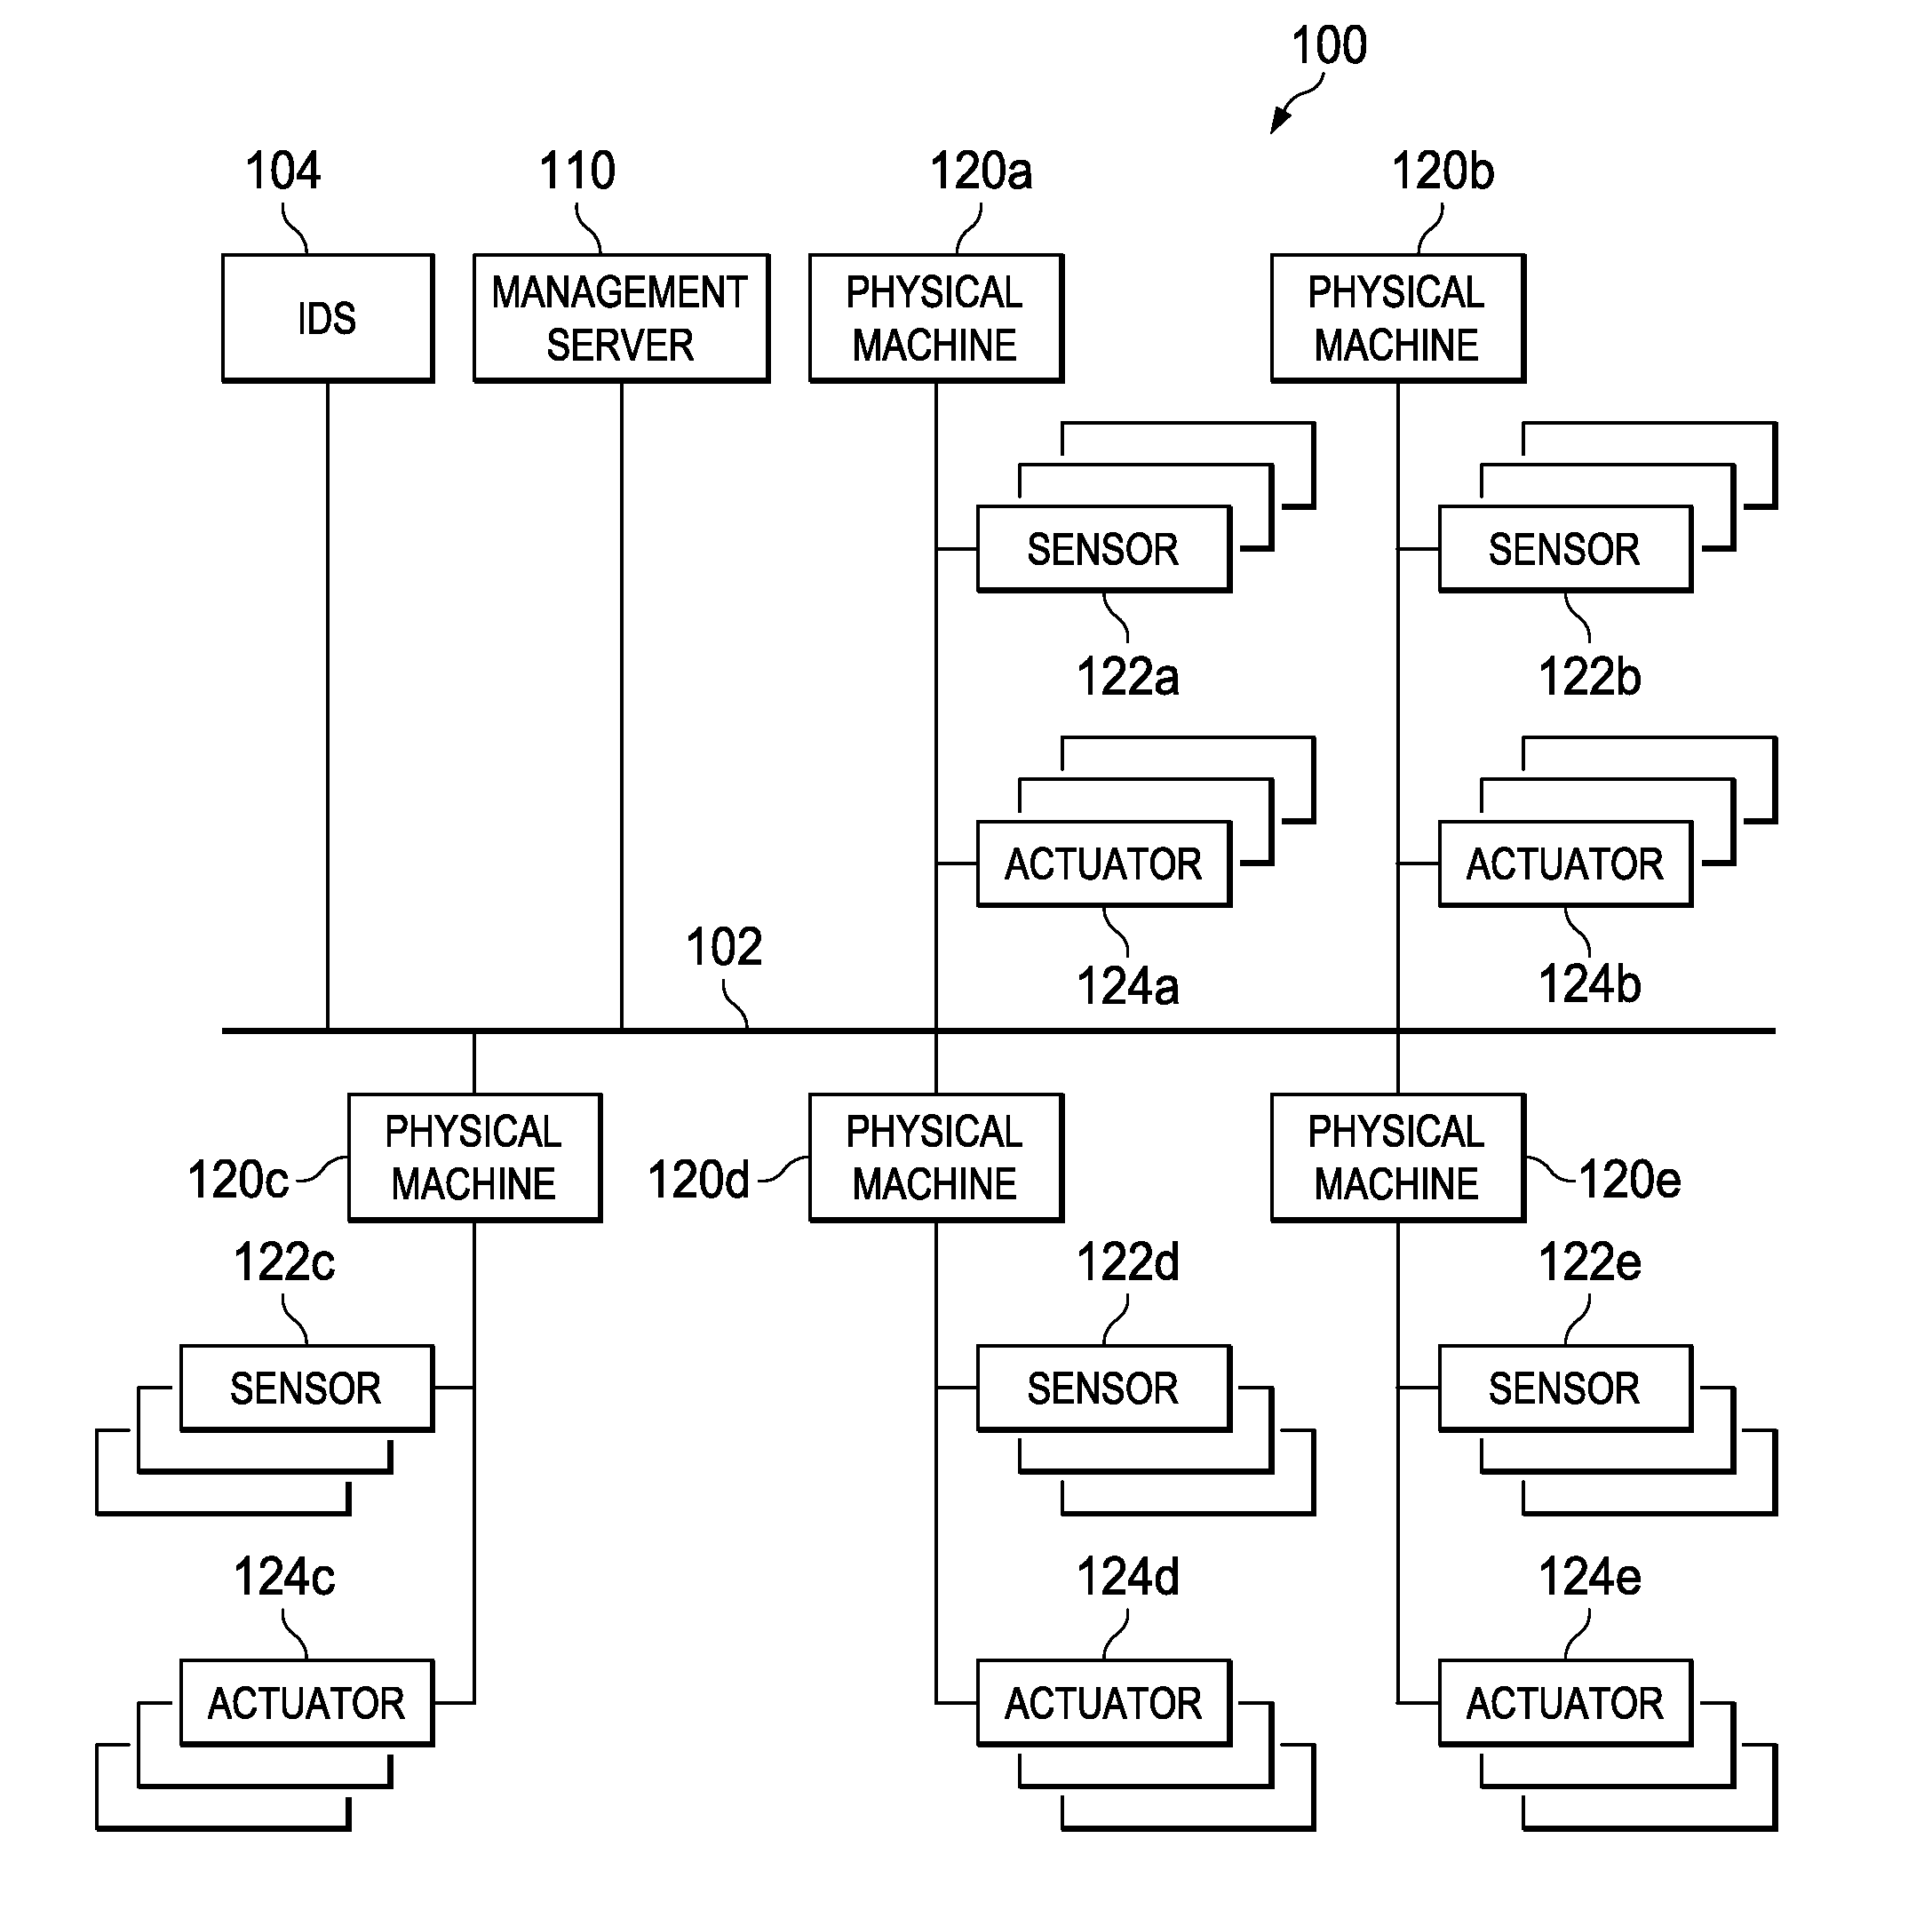 Abnormality Detection for Isolating a Control System